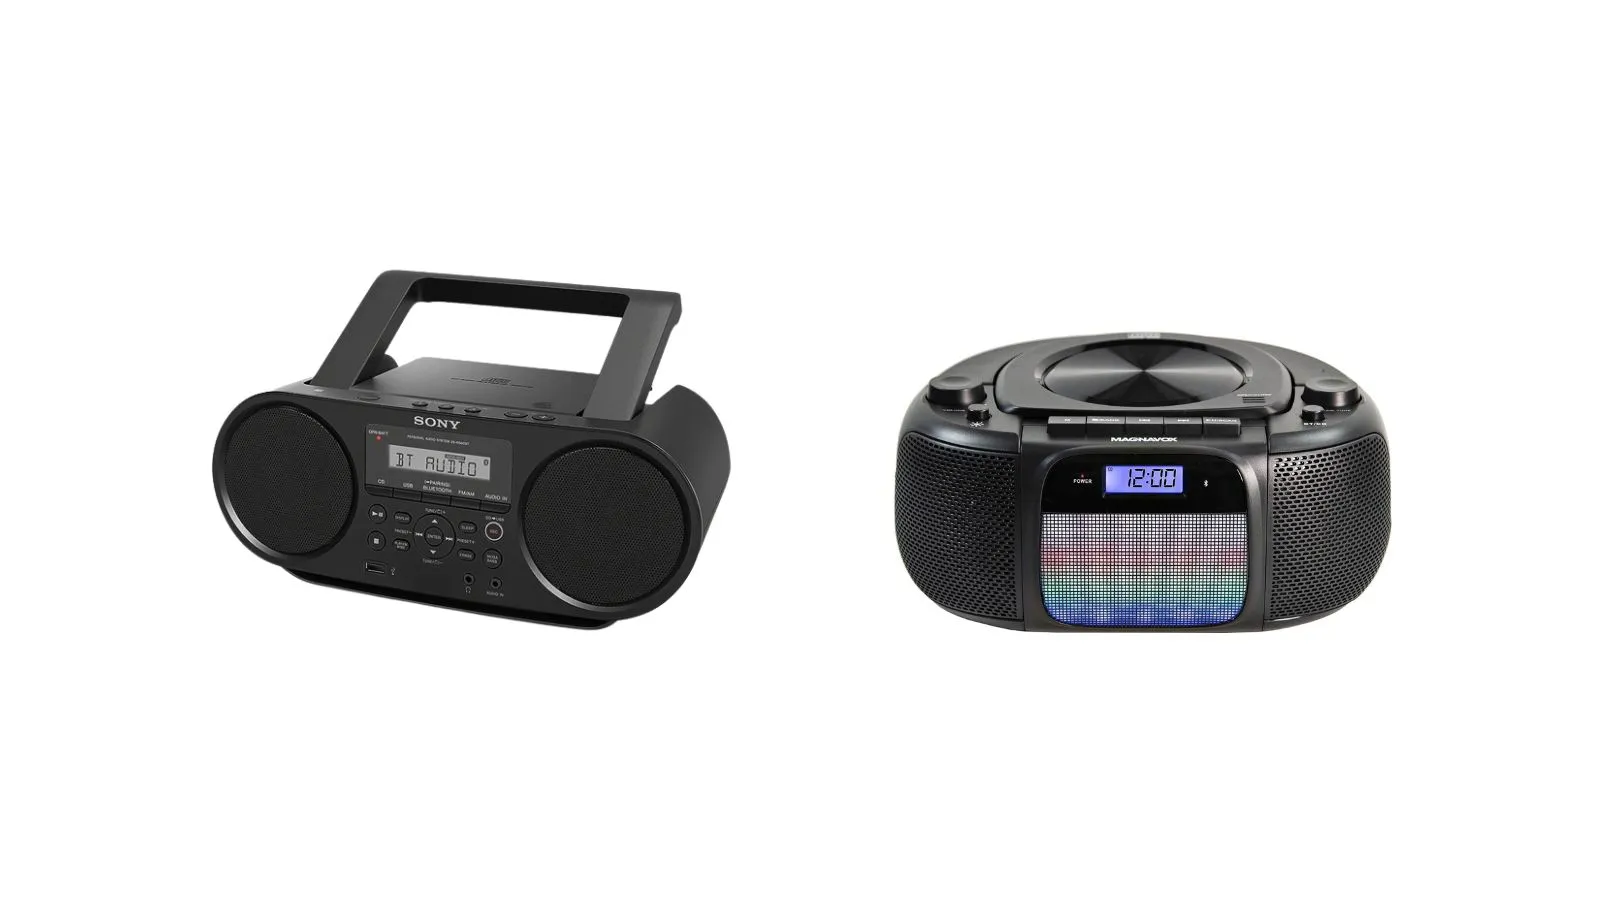 Smart vintage radio cd player with Prime Quality